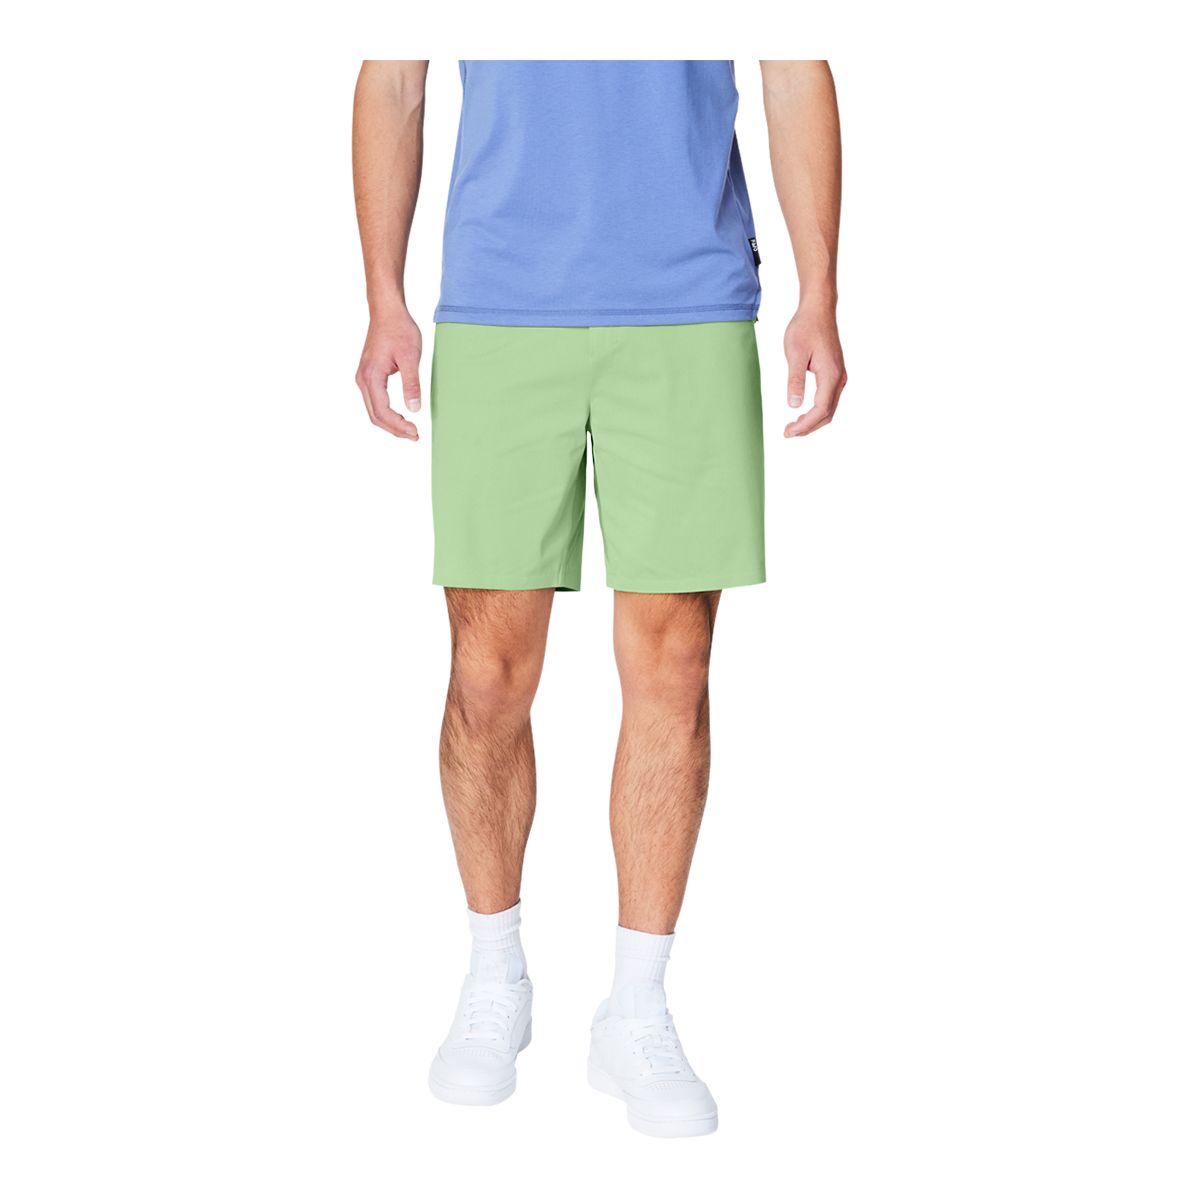 Image of FWD Men's Friday FWD Motionfit 8 Inch Hybrid Shorts